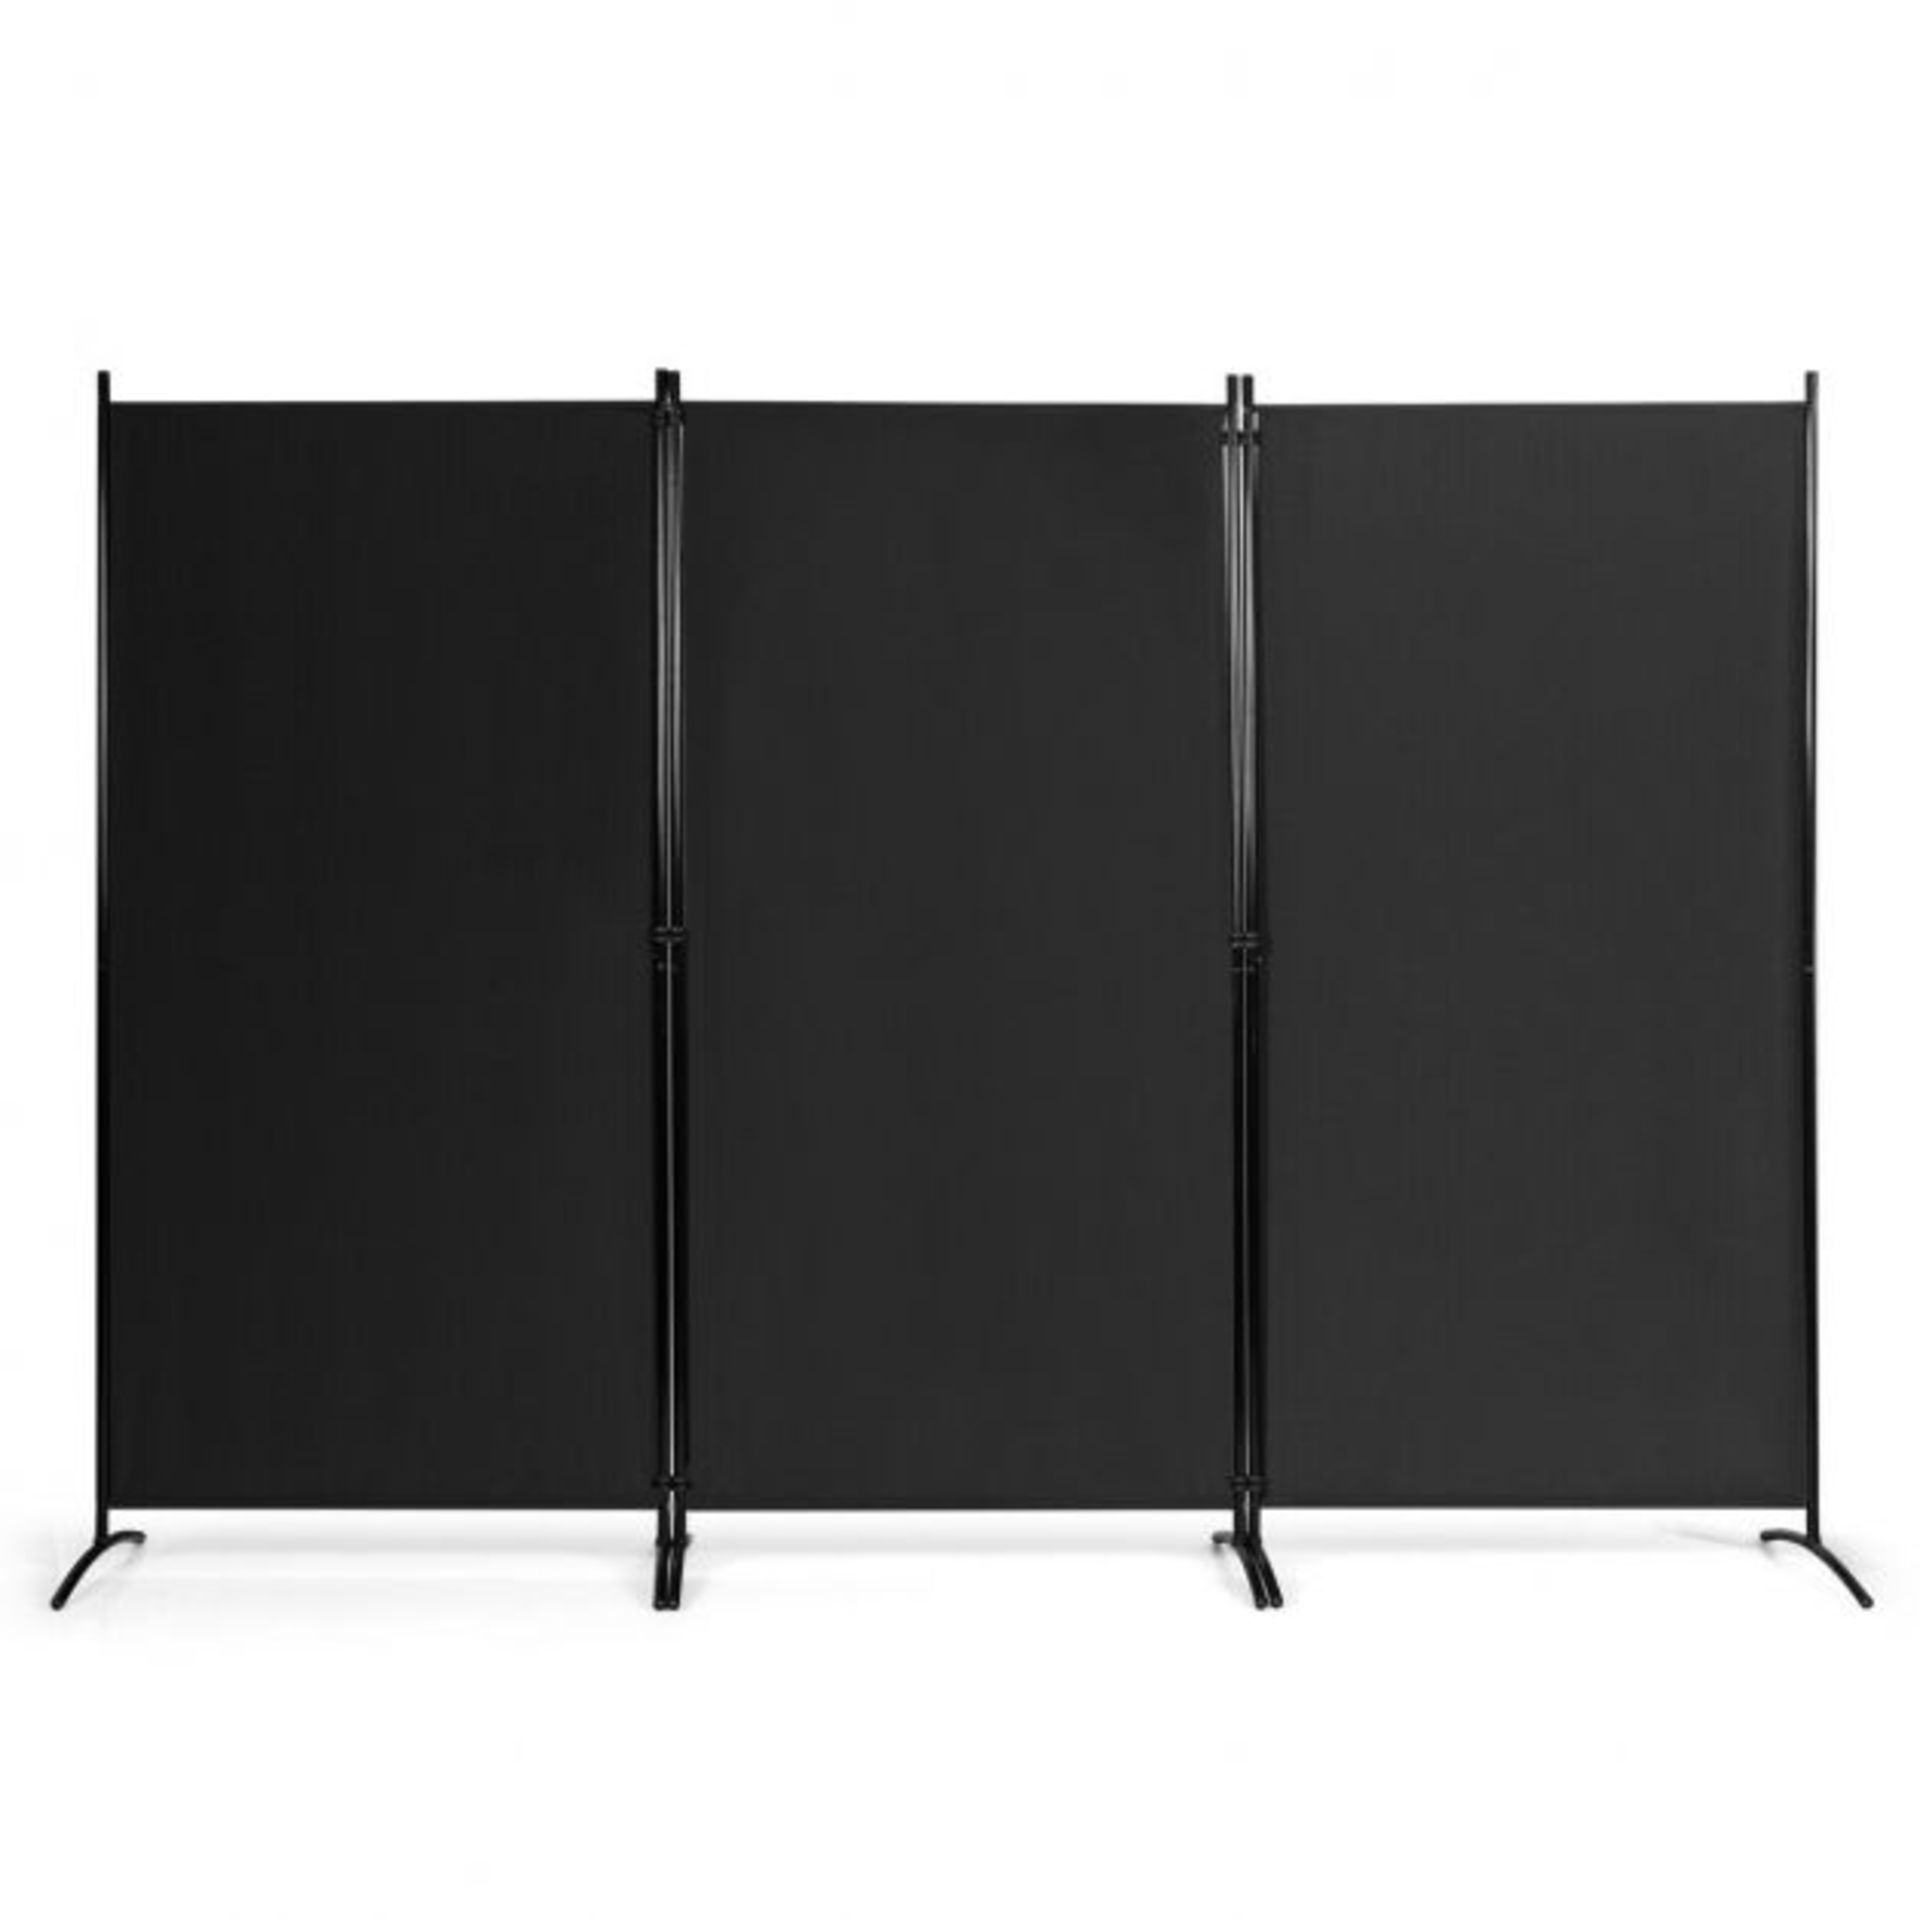 3 Panel Folding Room Divider. RRP £149.99. Do you long to have a private space in your home? This